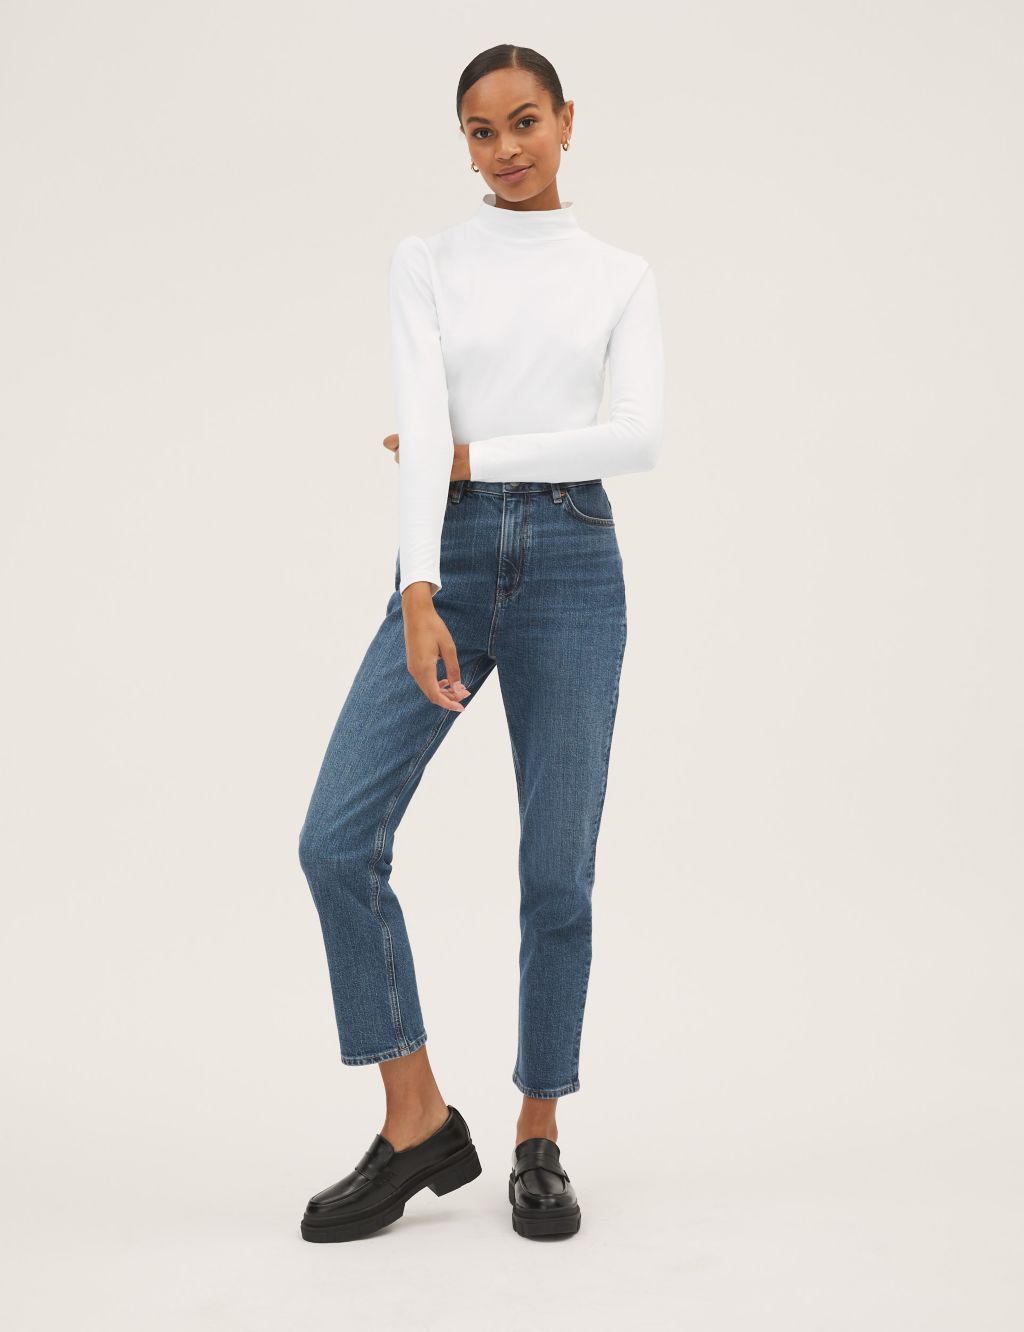 Cotton Rich Slim Fit Long Sleeve Top | M&S Collection | M&S